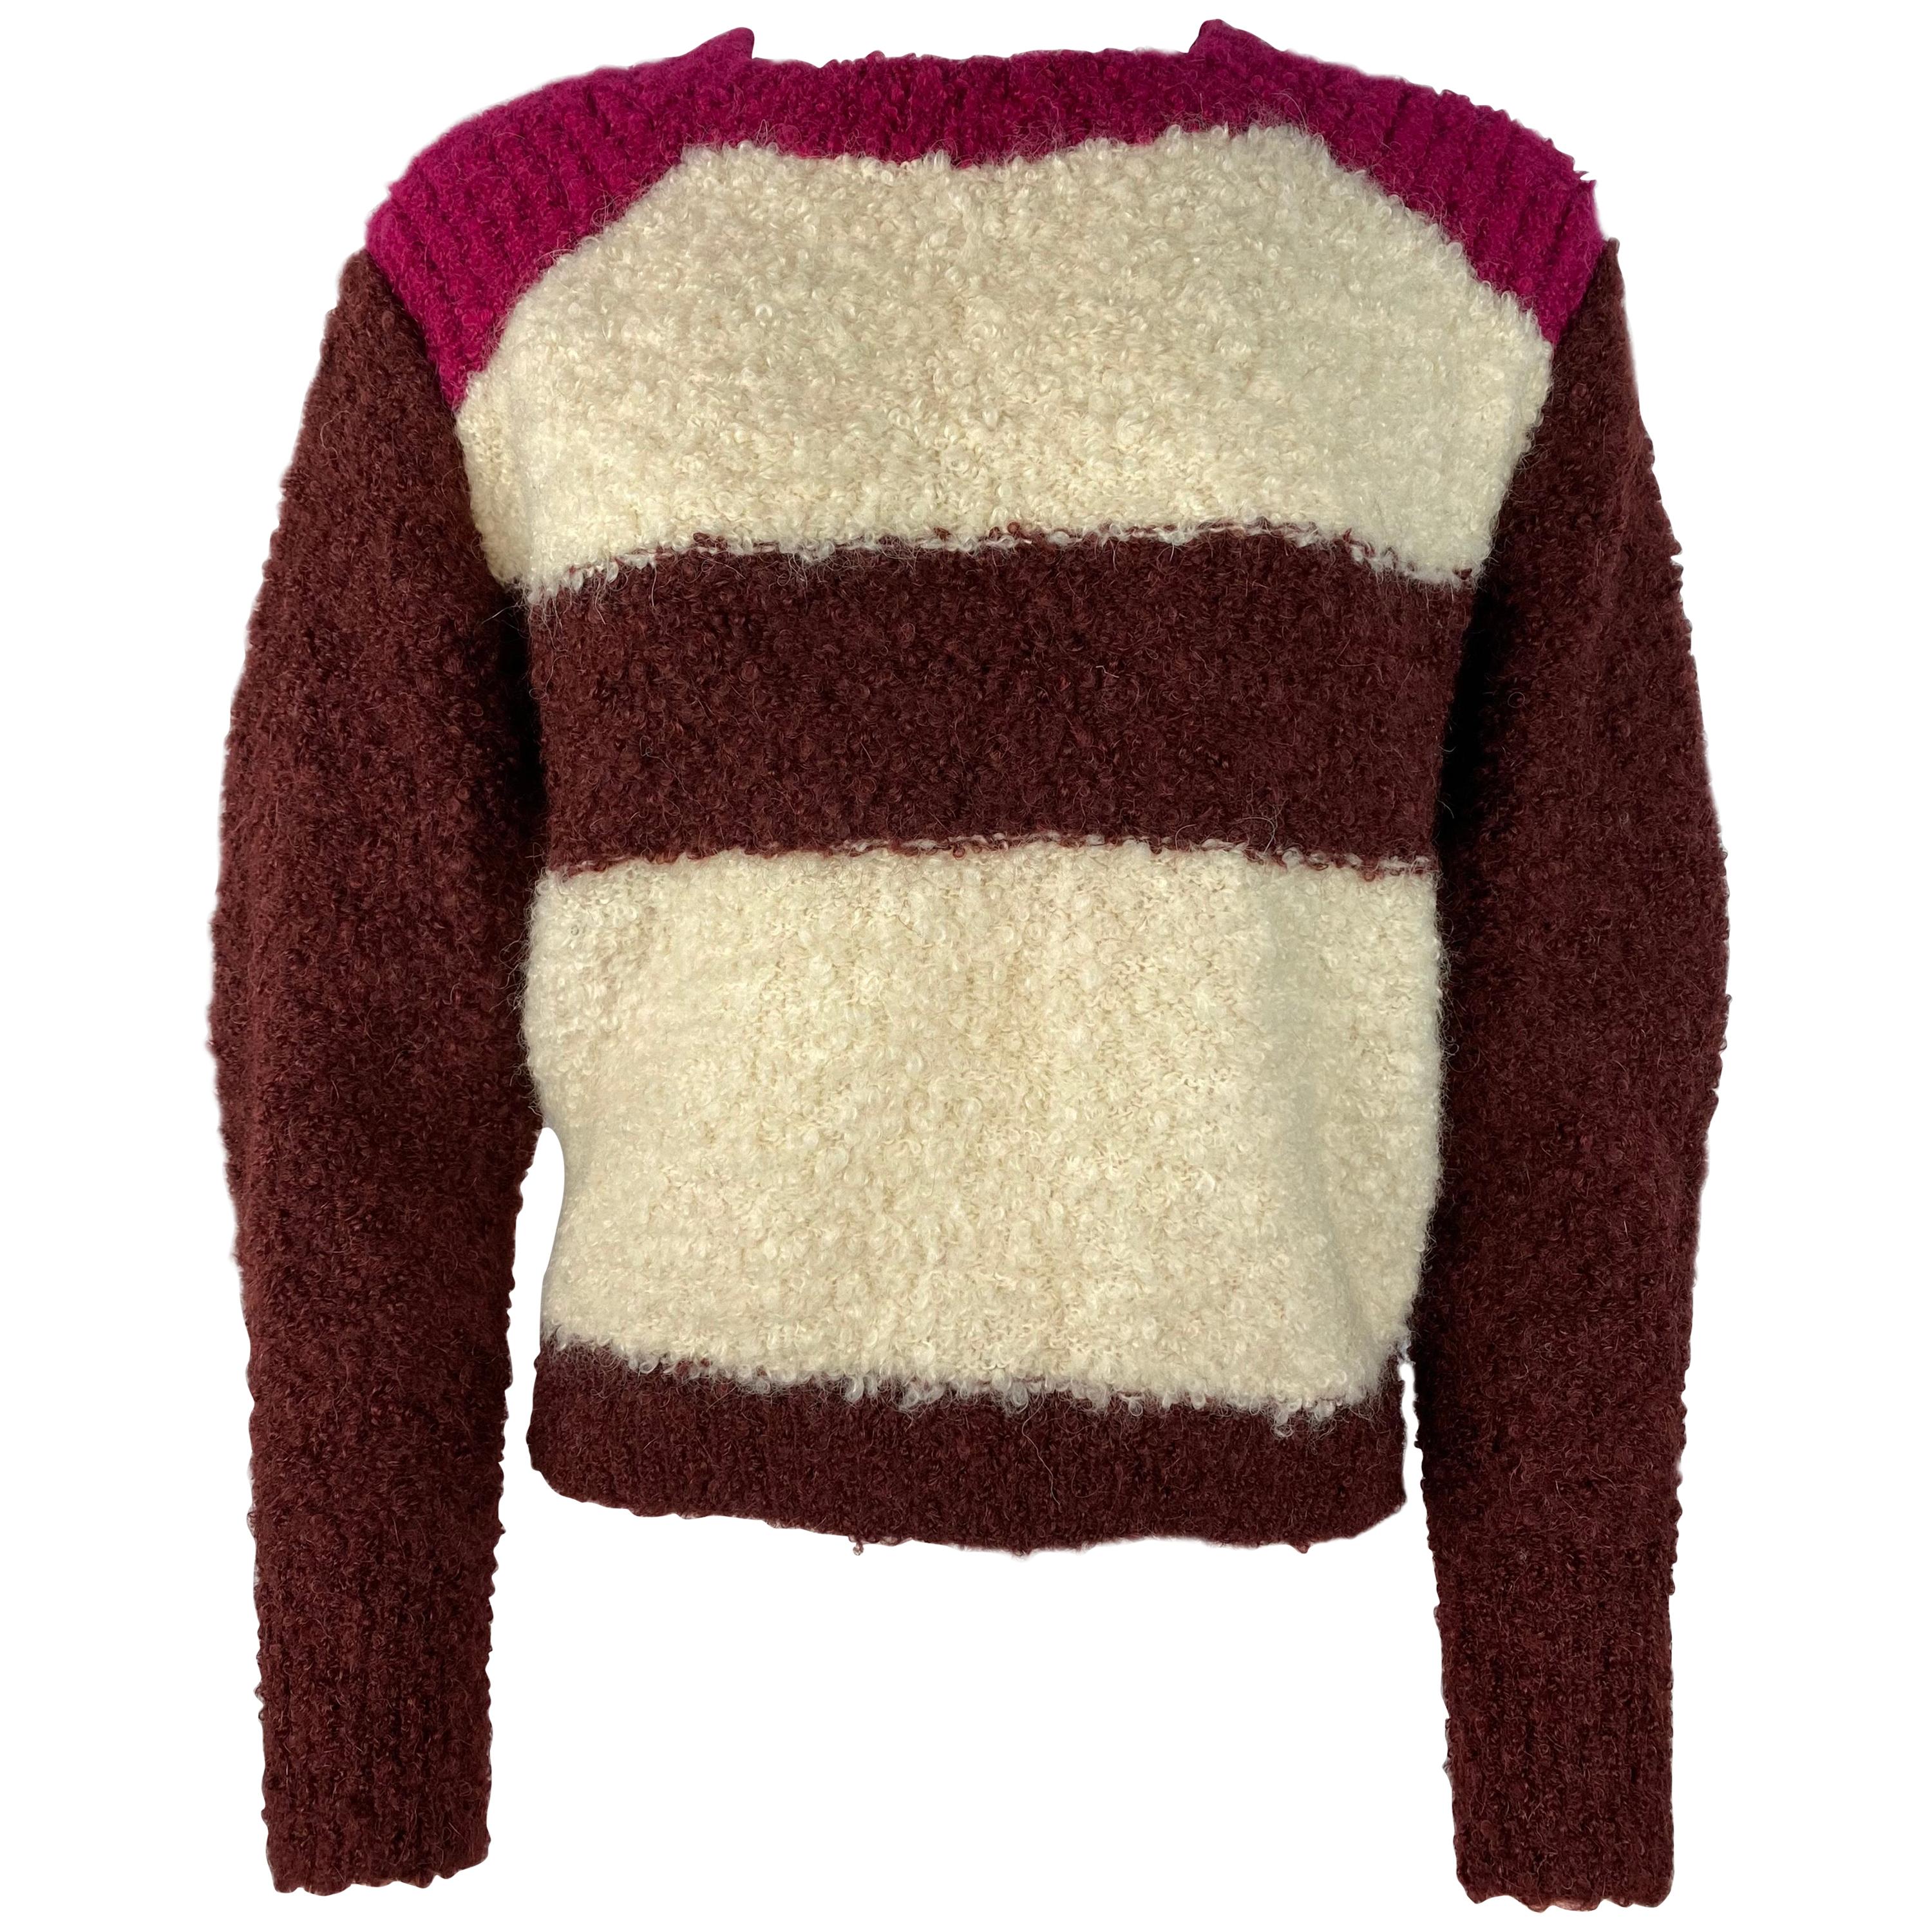 Isabel Marant Multicolor Mohair Pullover Sweater, Size 38